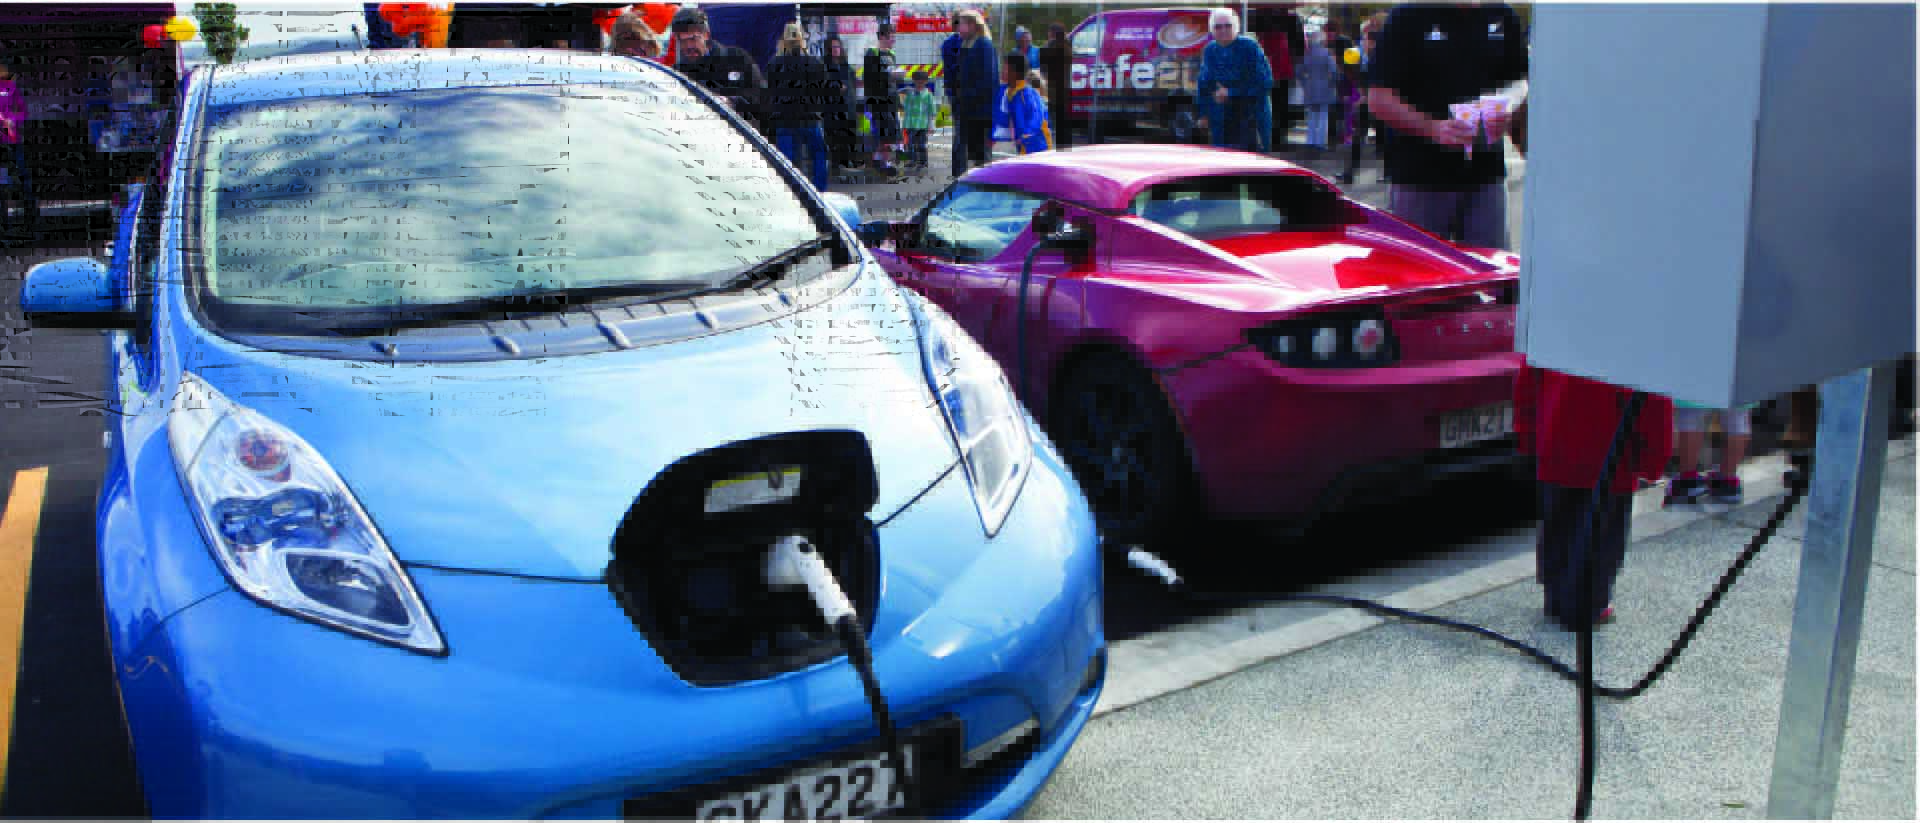 Two electric vehicles sharing a charging station.